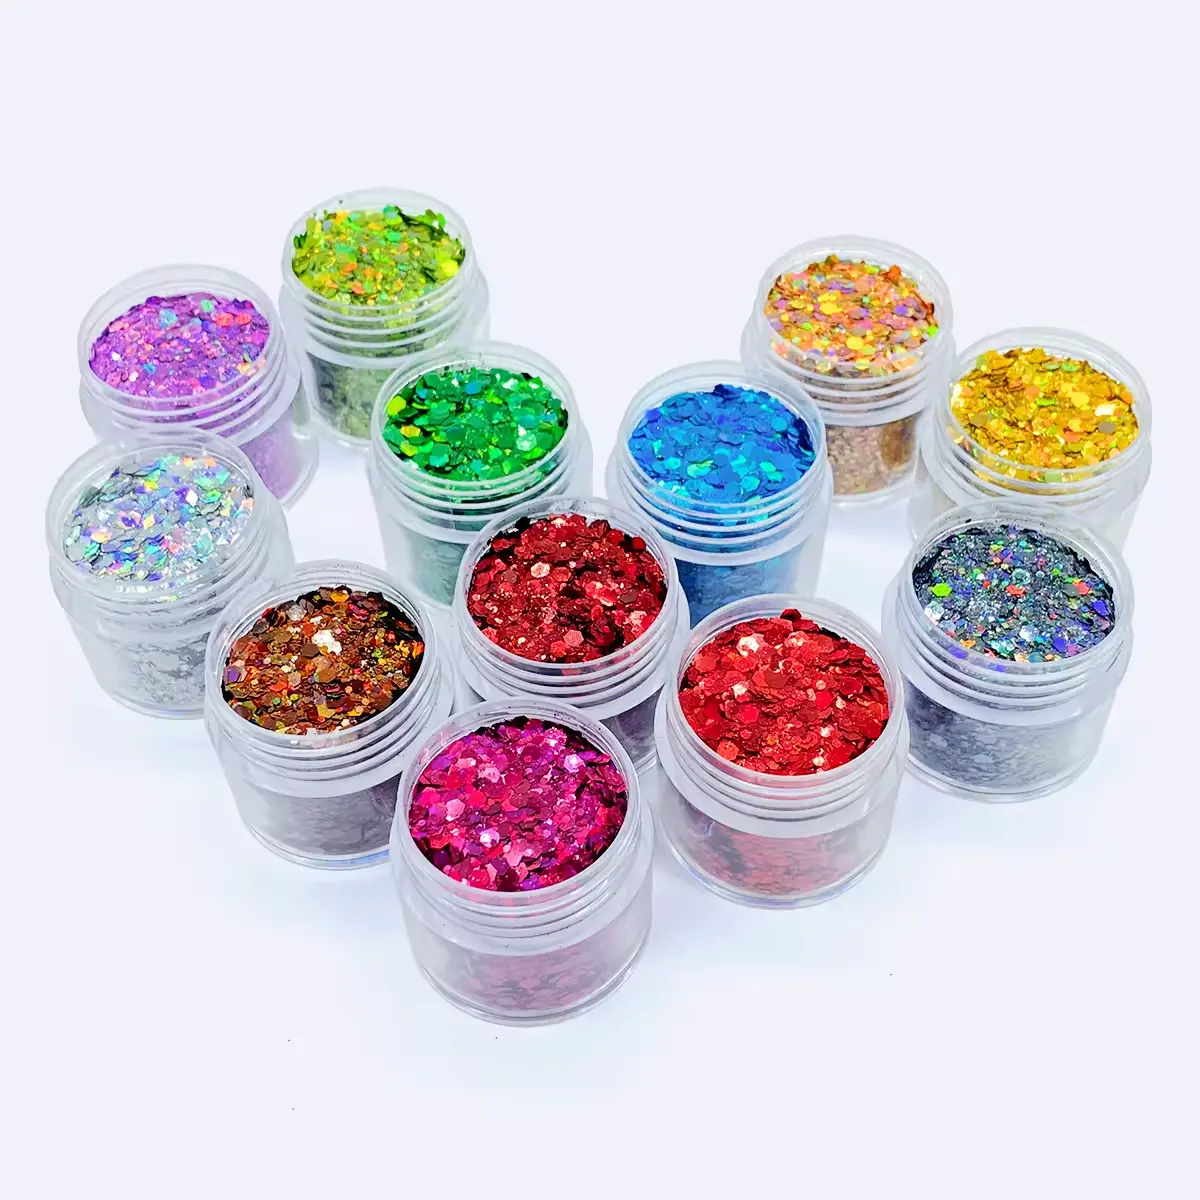 High Quality Biodegradable Glitter Body Face Cosmetic Bio degradable Glitters Chunky Biodegradable Glitter for Face Nail Makeup